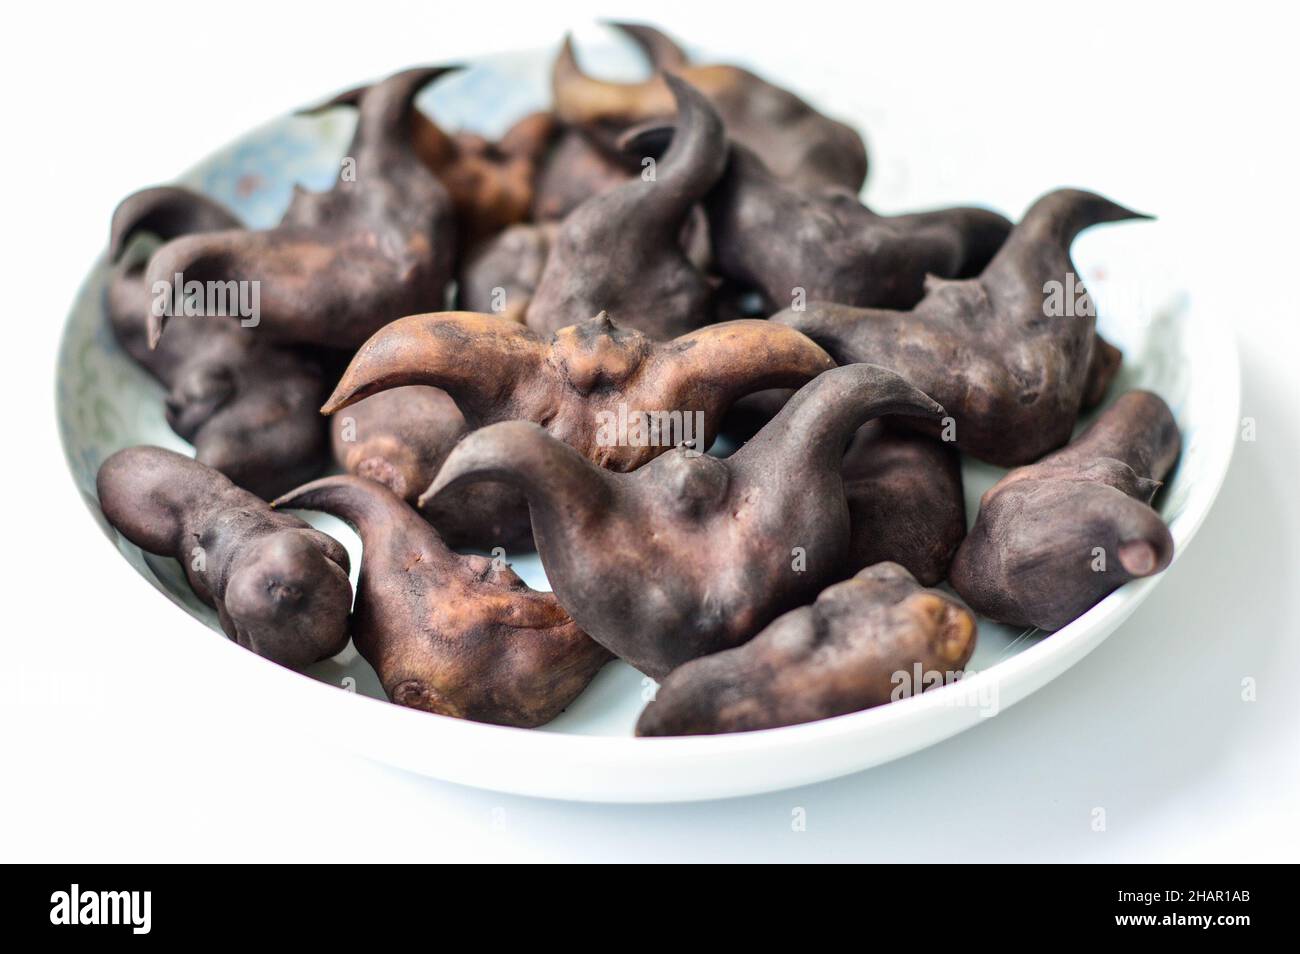 Chinese Ling Jiao (water caltrop) in a plate isolated on the white background. Stock Photo